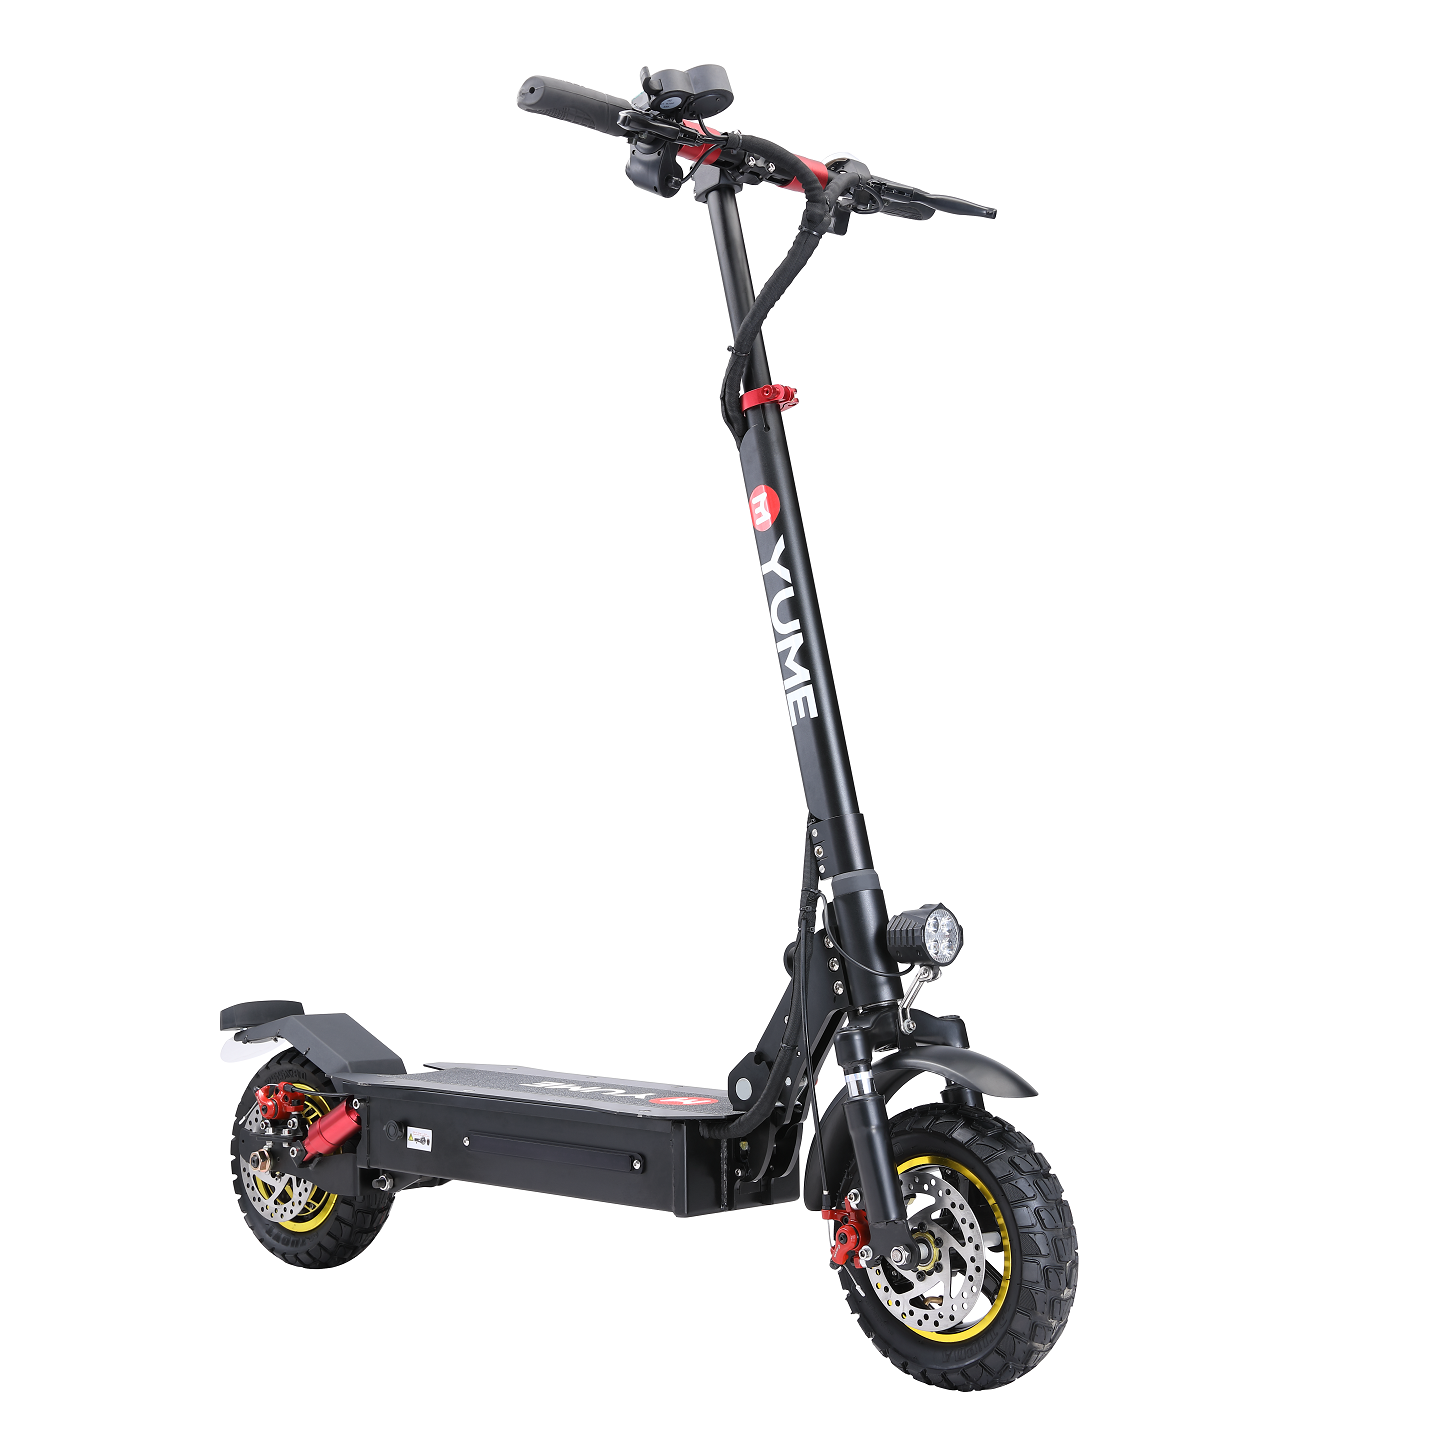 [EU DIRECT] YUME S10 48V 1000W 21AH 10inch Tire Folding Electric Scooter 40-45Km/h Top Speed 45-65Km Mileage 120Kg Max Load Scooter